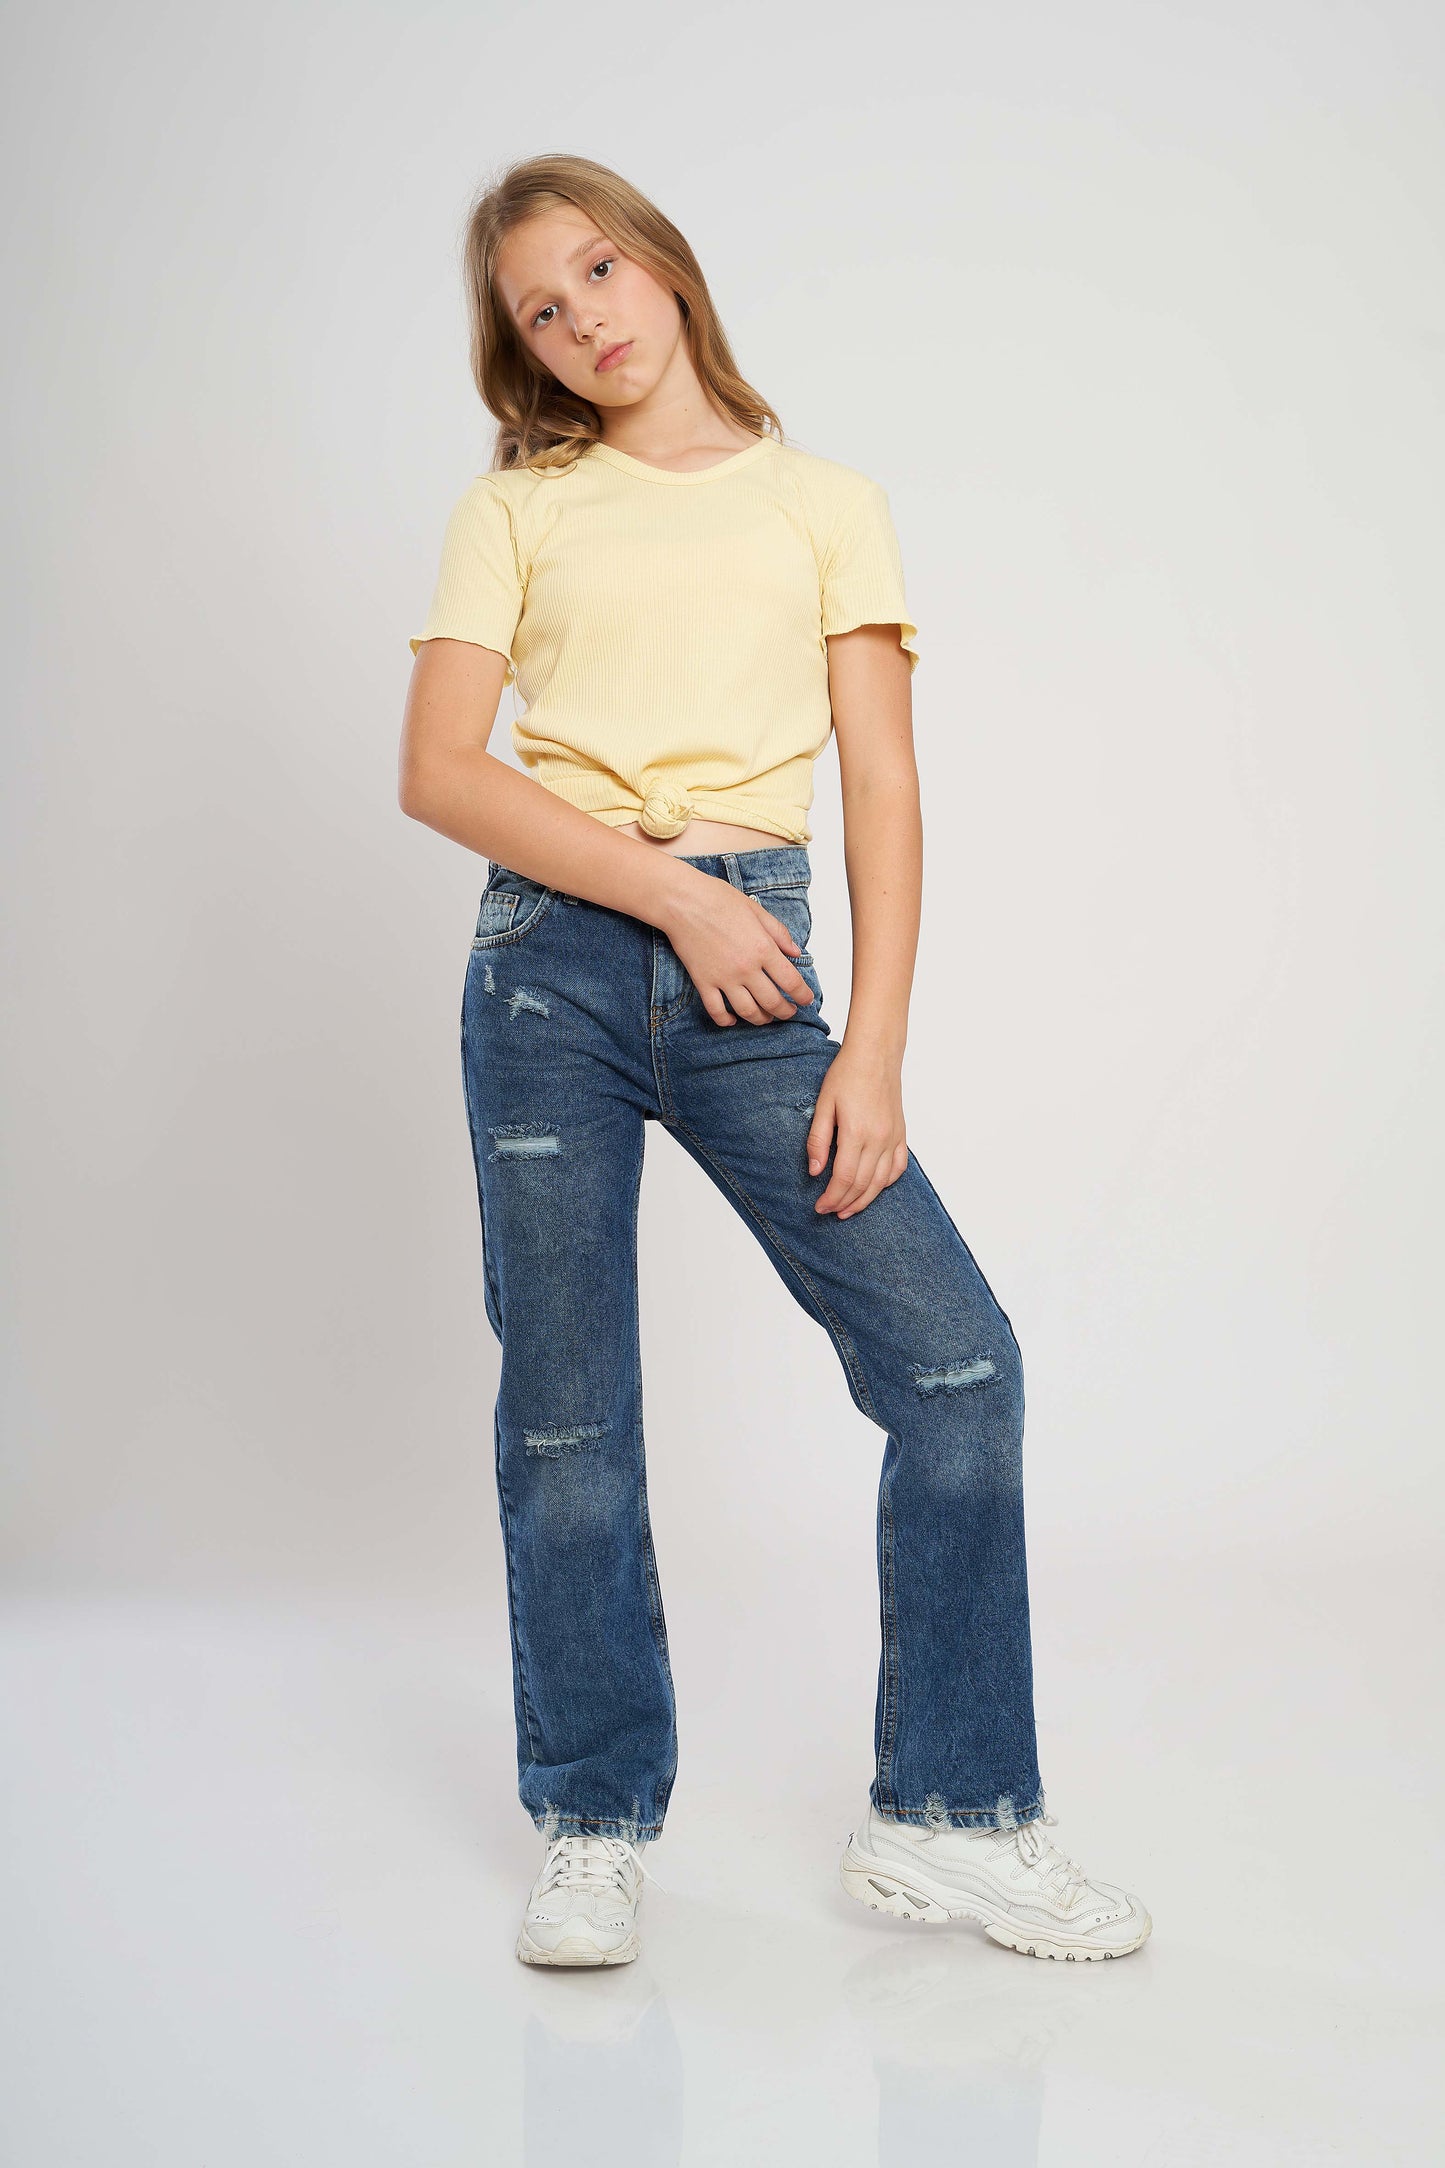 TEXTURED TOP WITH RUFFLED TRIMS - KIDS